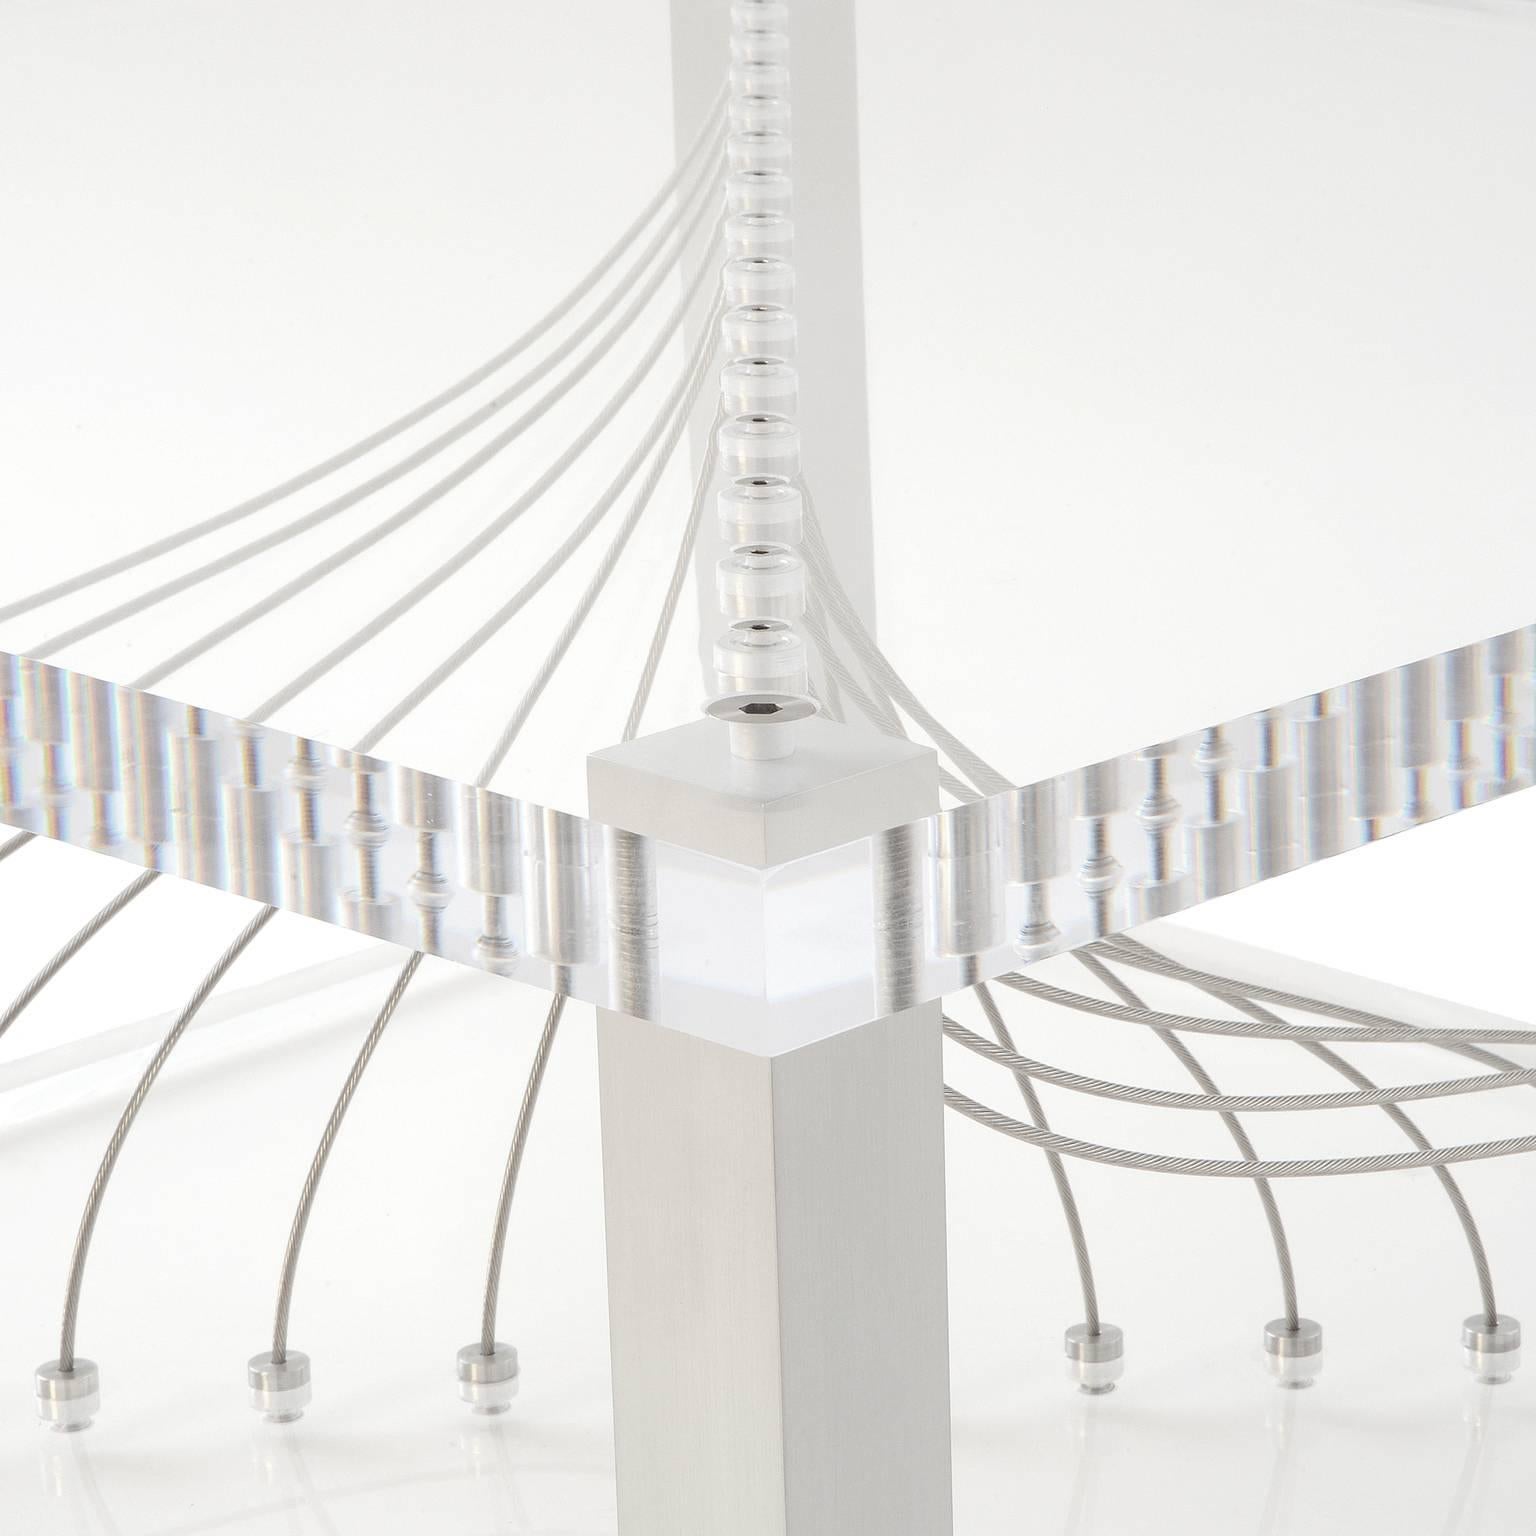 Acrylic Argon by Peter Harrison is a stunning coffee table made from 1.5 inch thick acrylic, aluminium and stainless steel cable. The cables are individually integrated to create an amazing visual experience. The cables flex as they are touched, yet